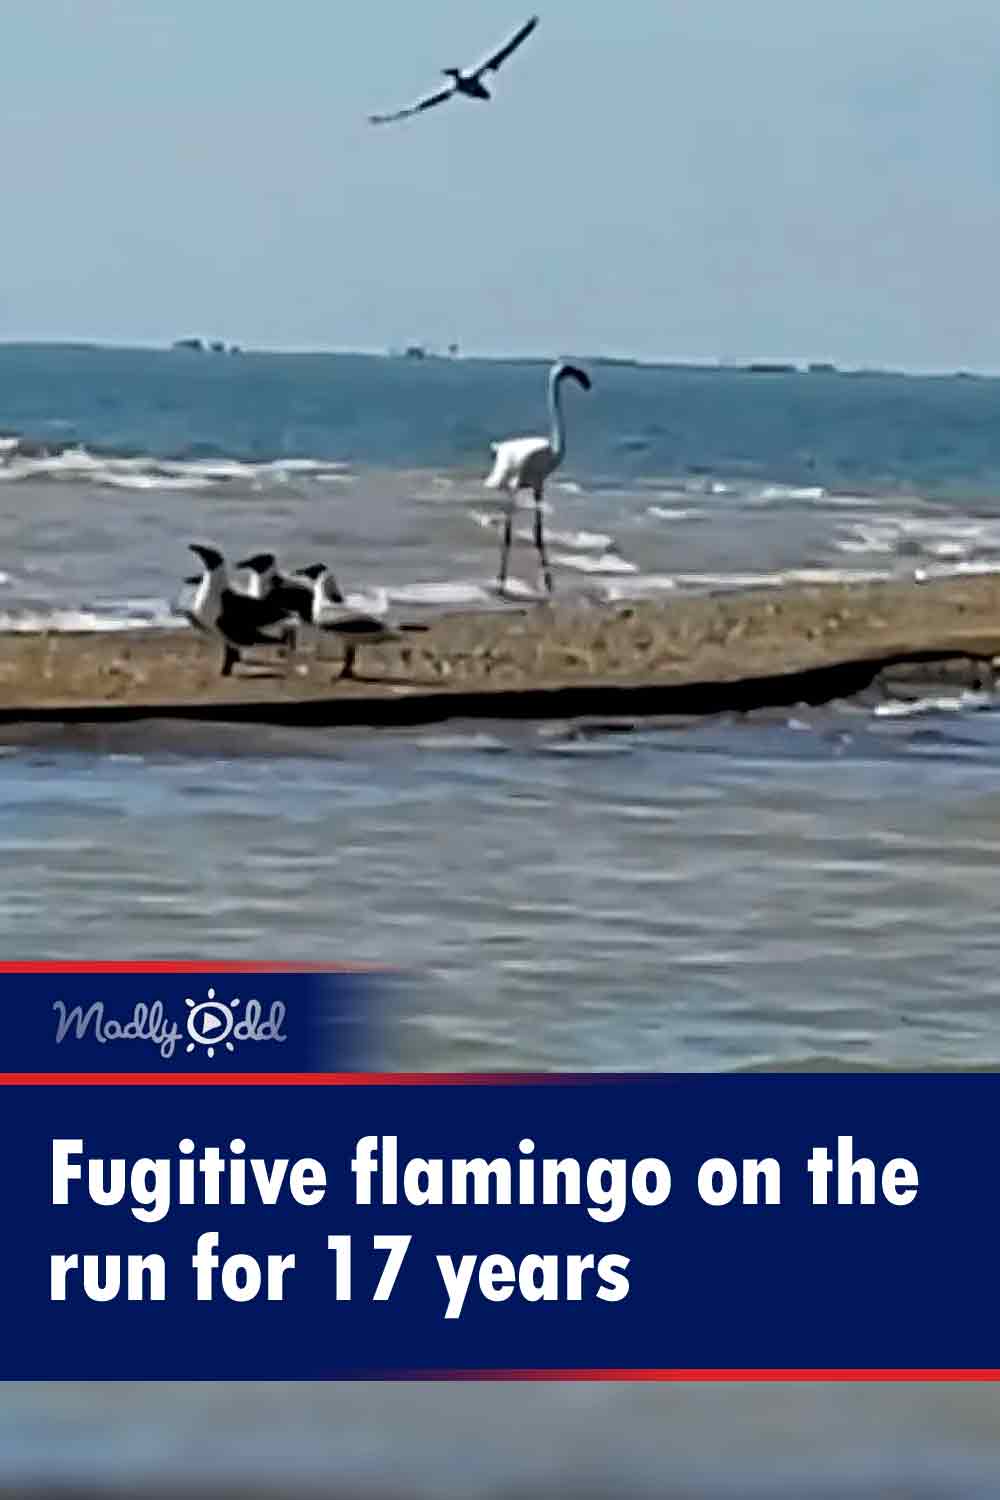 Fugitive flamingo on the run for 17 years